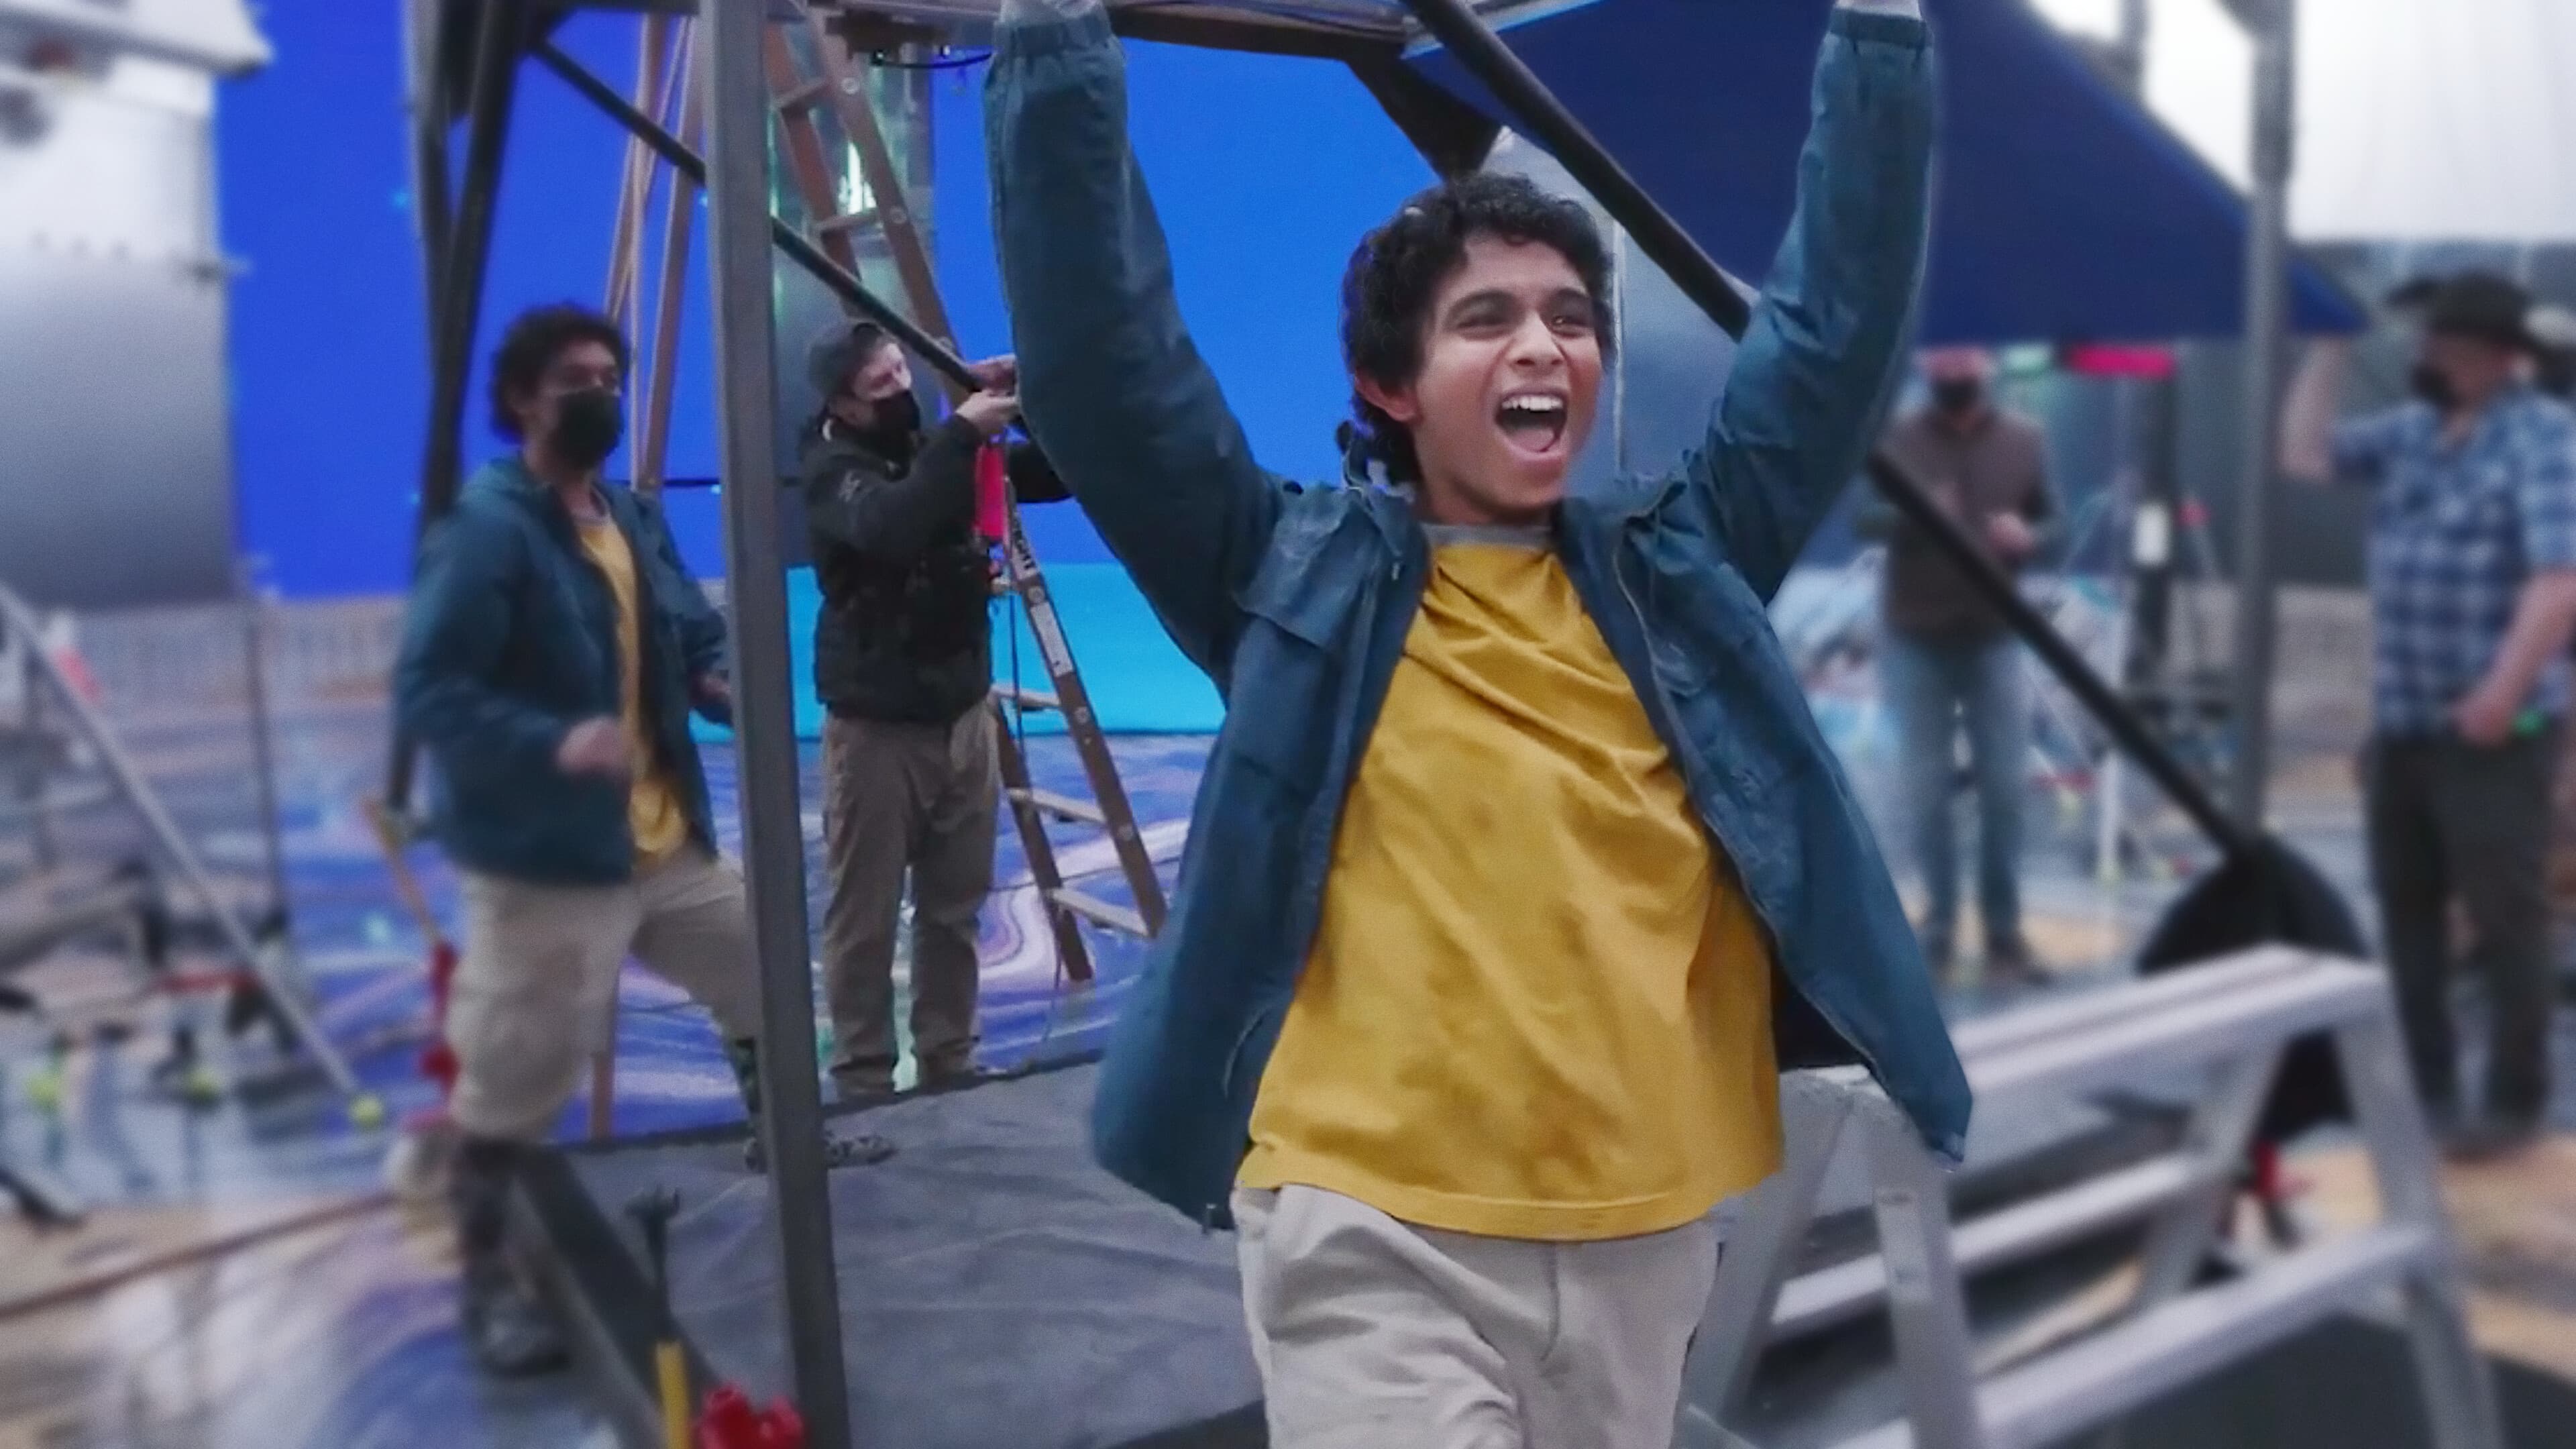 A Hero's Journey: The Making of Percy Jackson and the Olympians (2024)